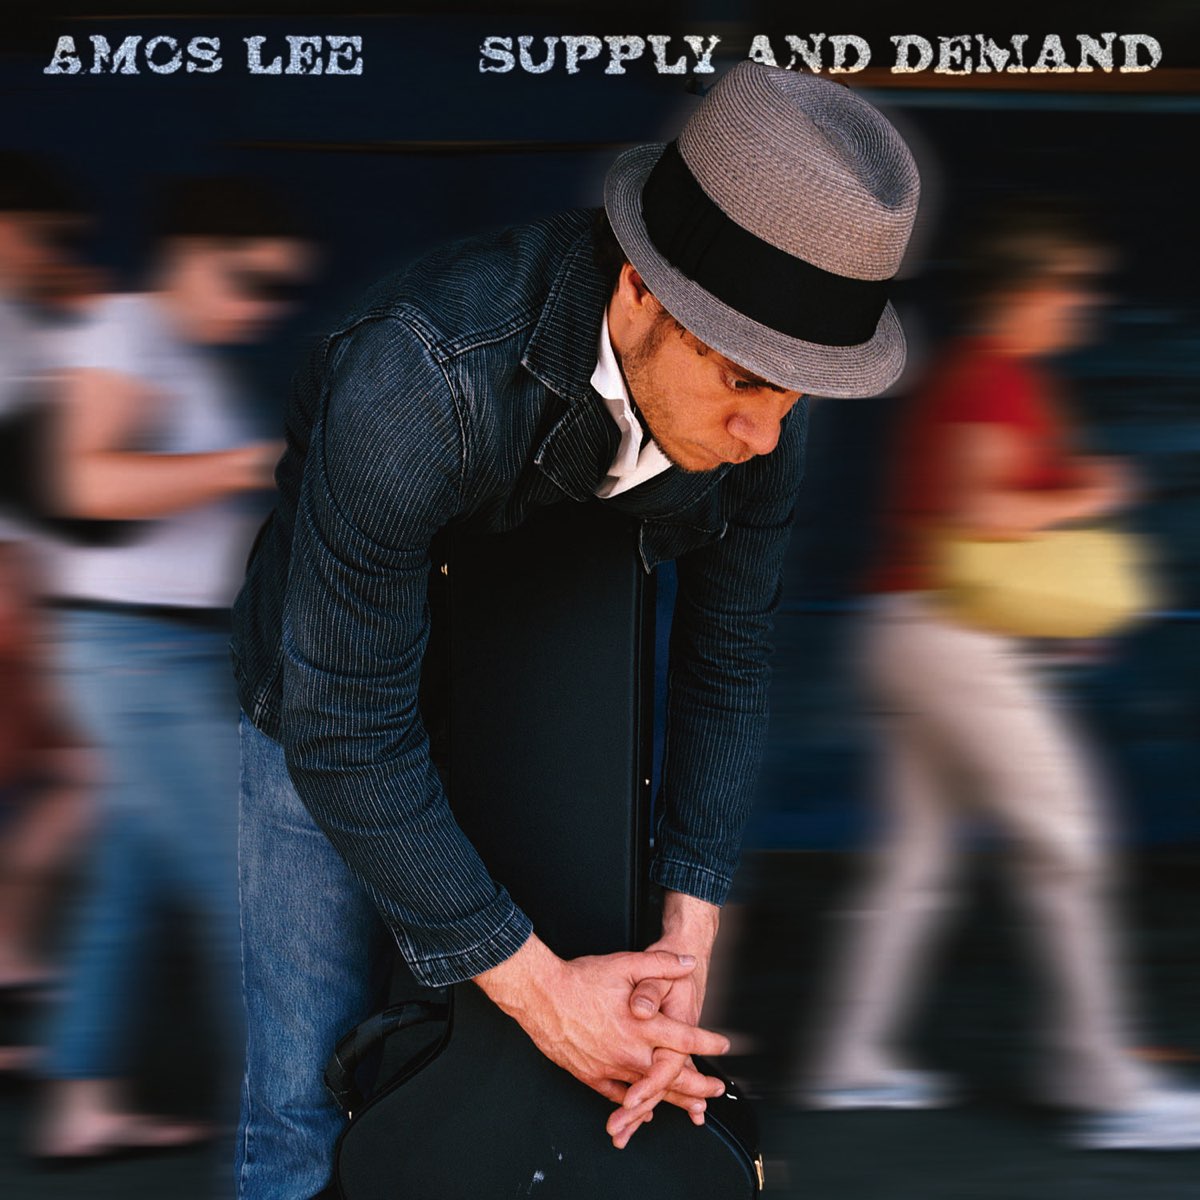 Supply and Demand by Amos Lee on Apple Music